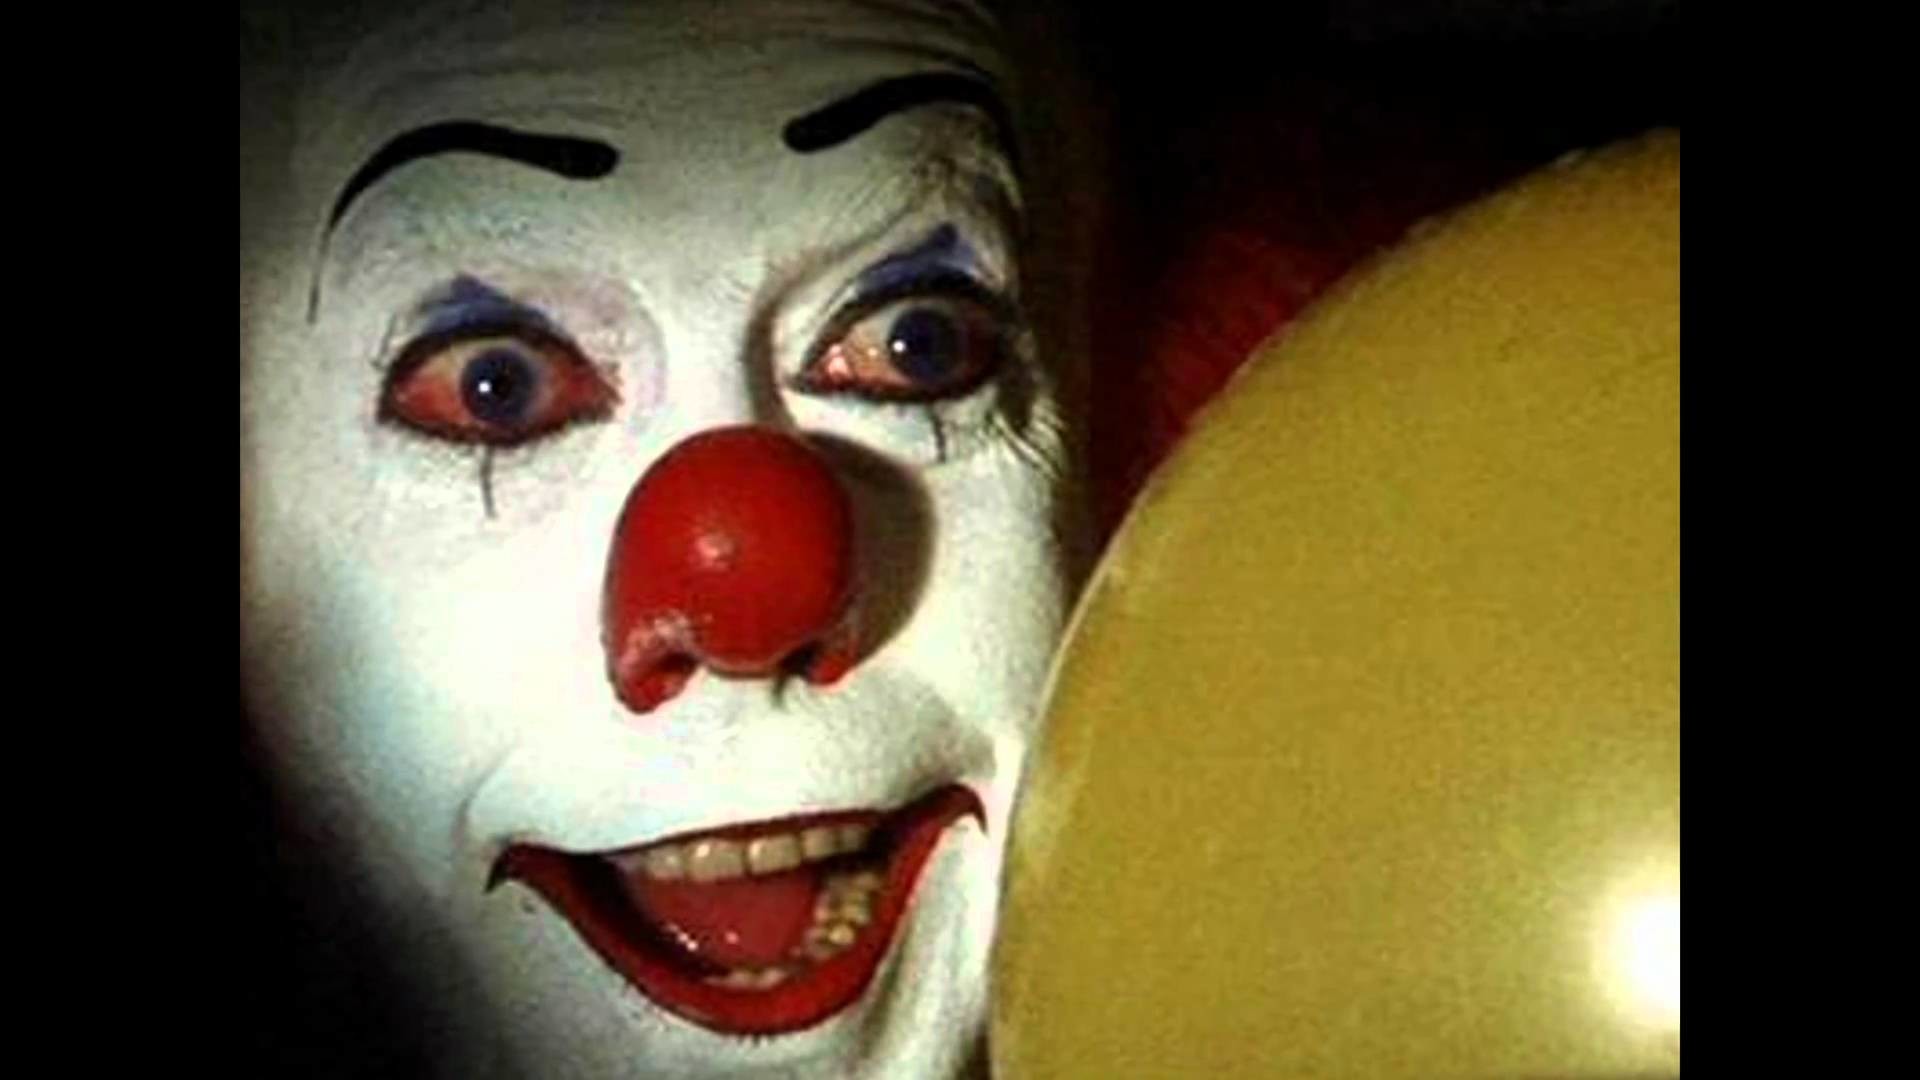 1920x1080 Guess who clown evil mean pennywise scary wallpaper | Skulls .